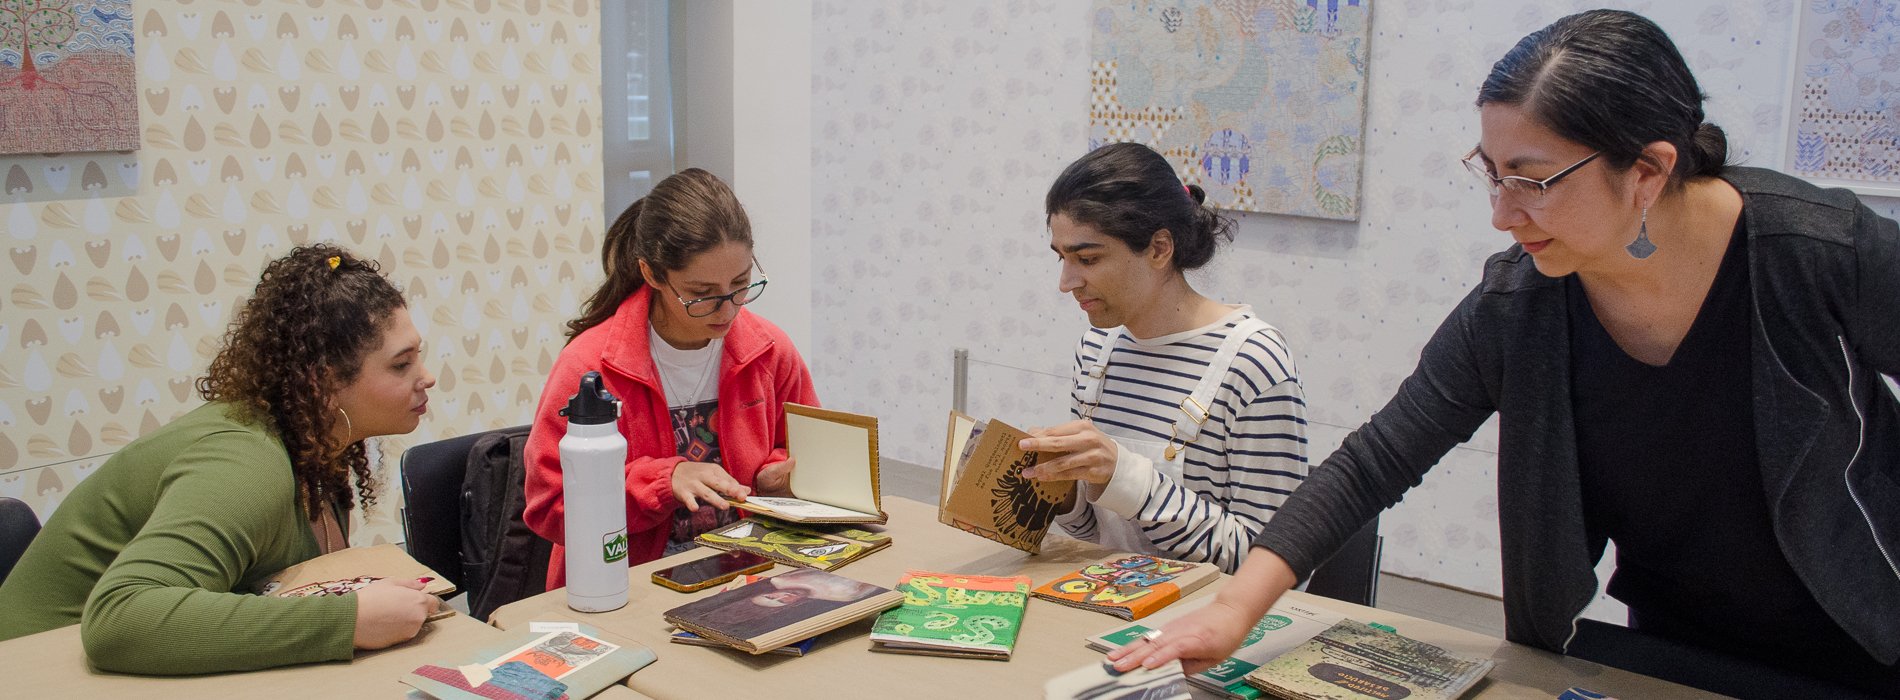 Students participating in a book making workshop